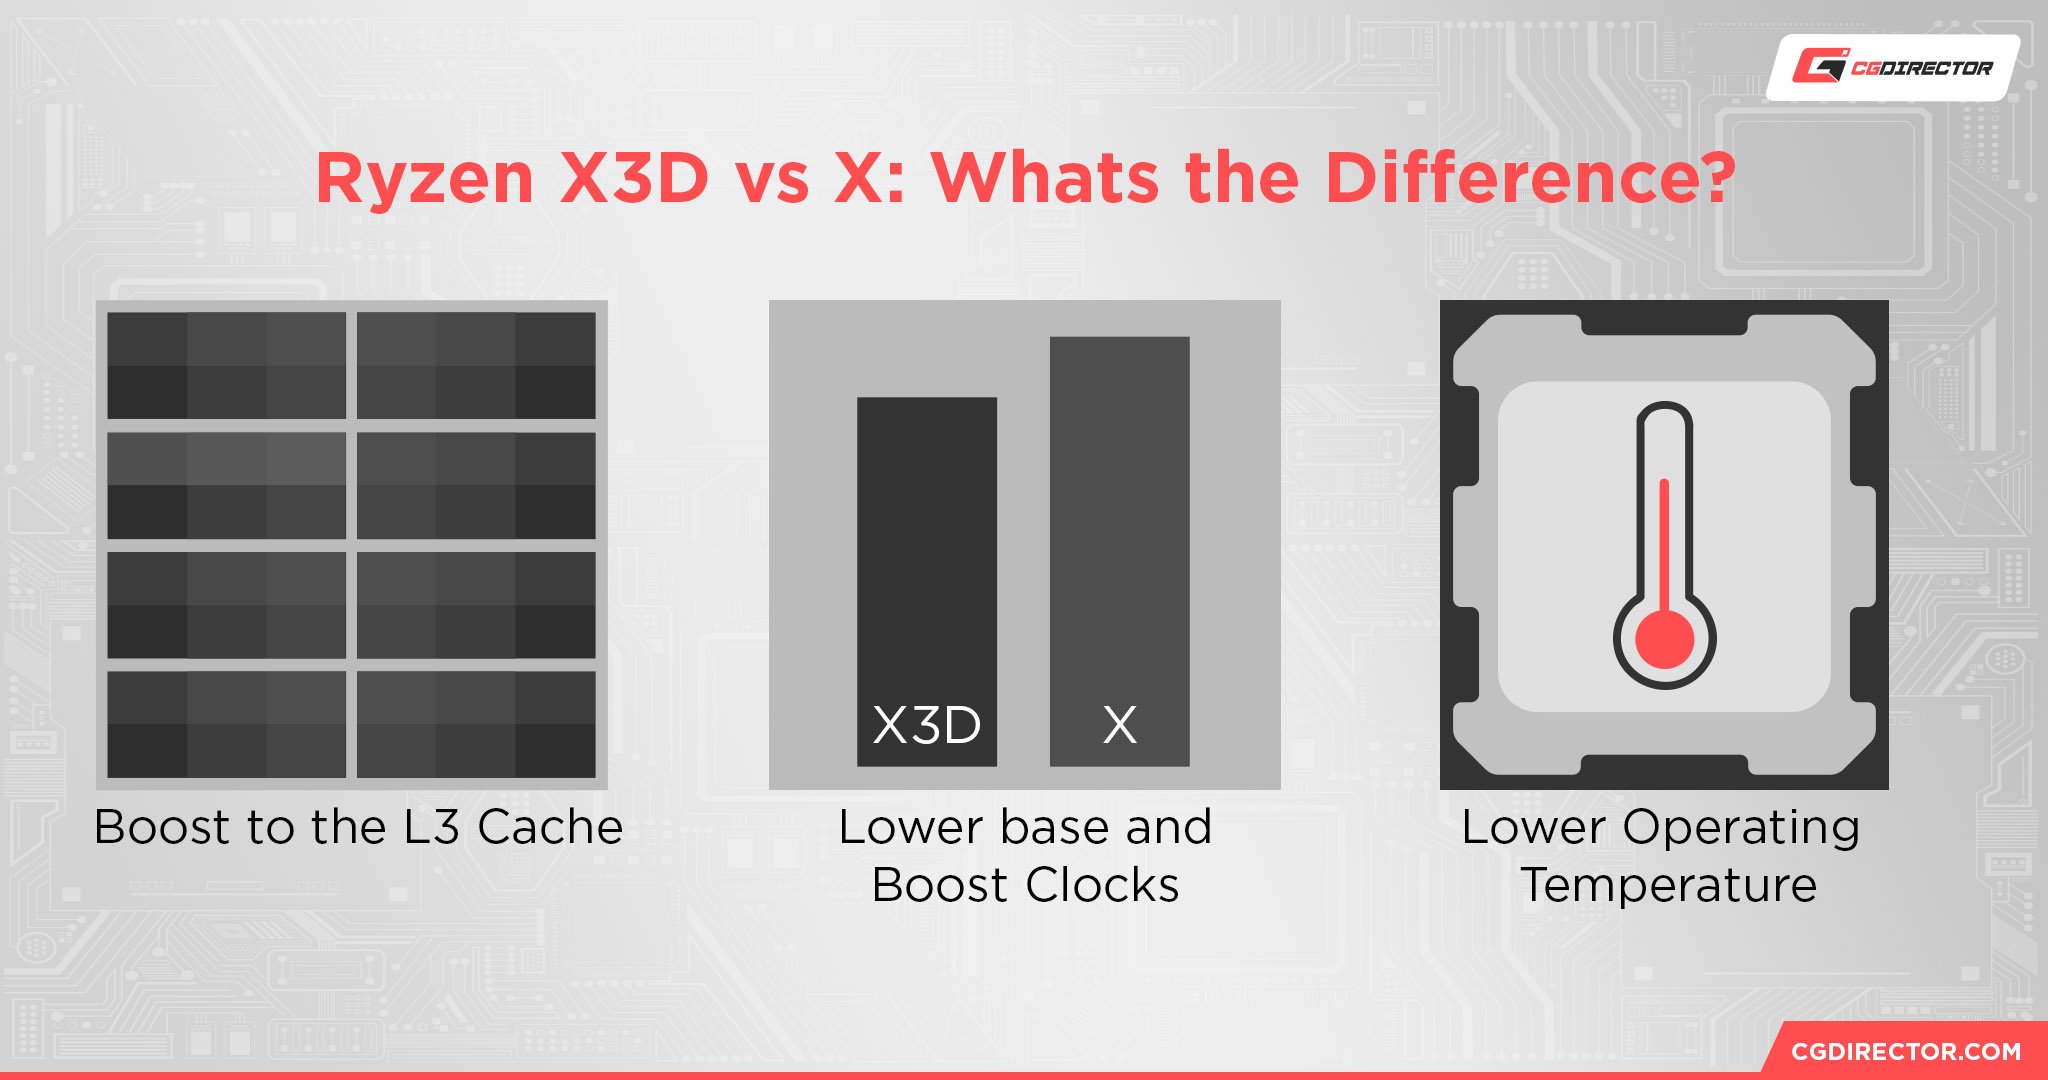 Ryzen X3D vs X Whats the Difference